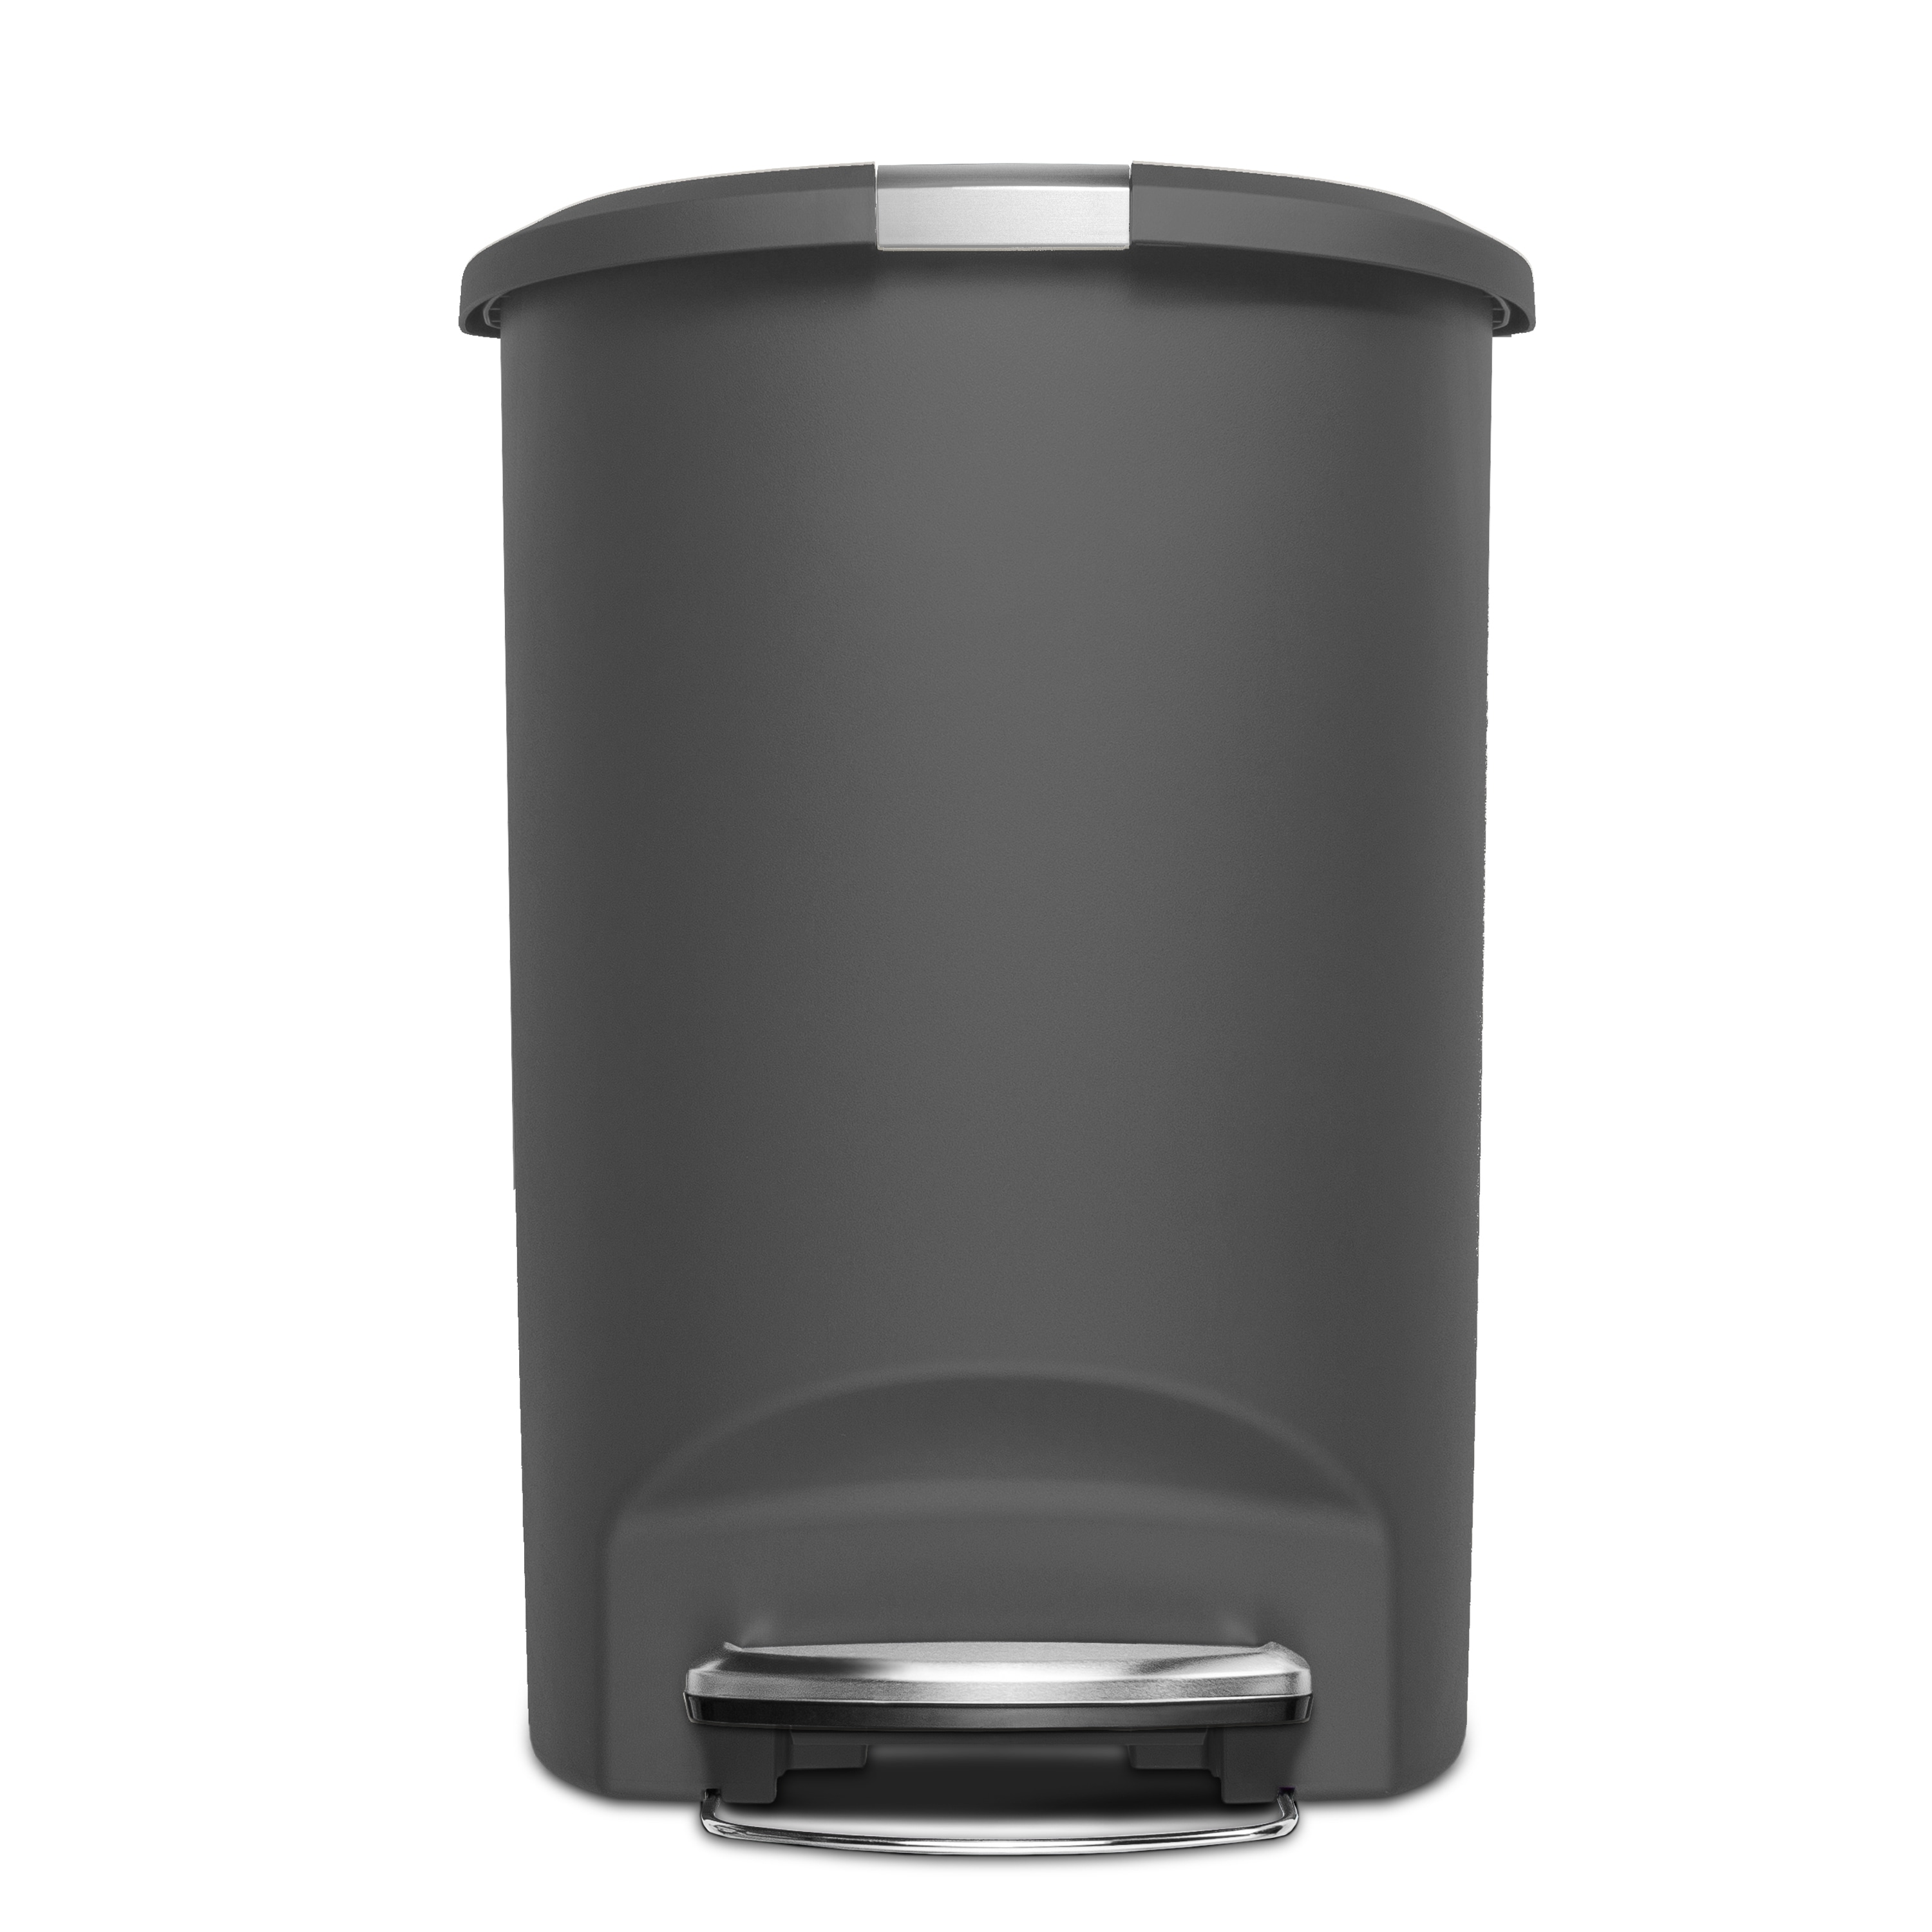 Trash Can 14.5 Gallon Stainless Steel Semi-Round Kitchen Garbage Bin  Covered Lid